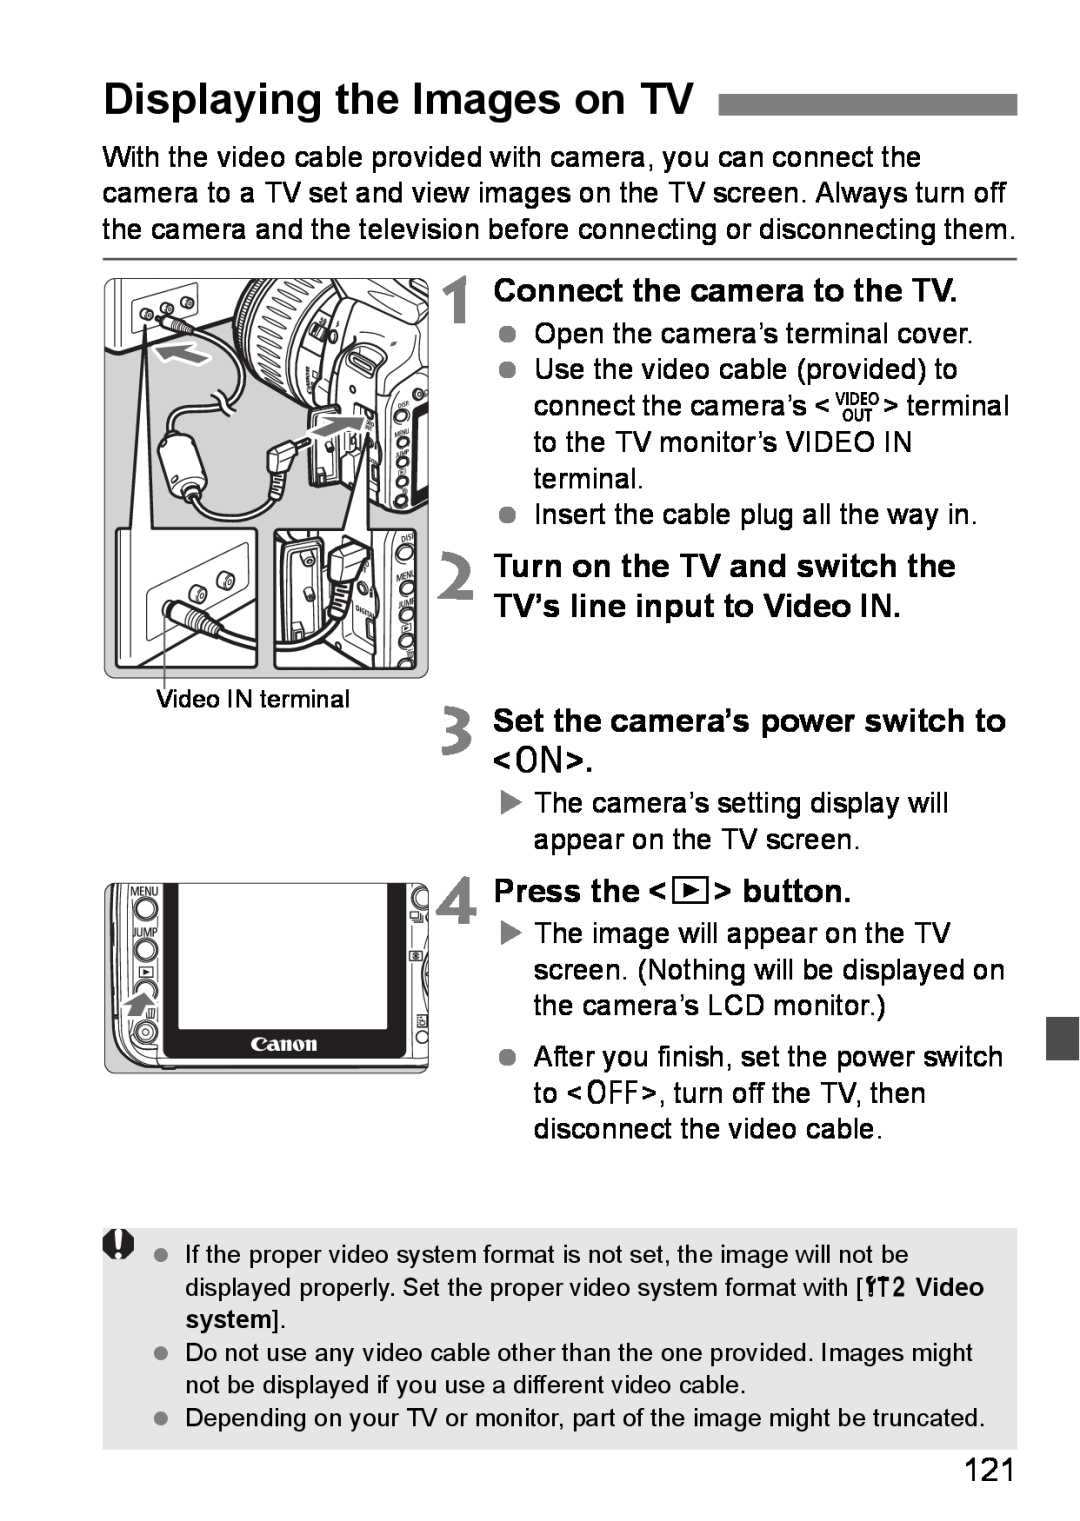 Canon EOS DIGITAL REBEL XTI Displaying the Images on TV, Connect the camera to the TV, Turn on the TV and switch the 